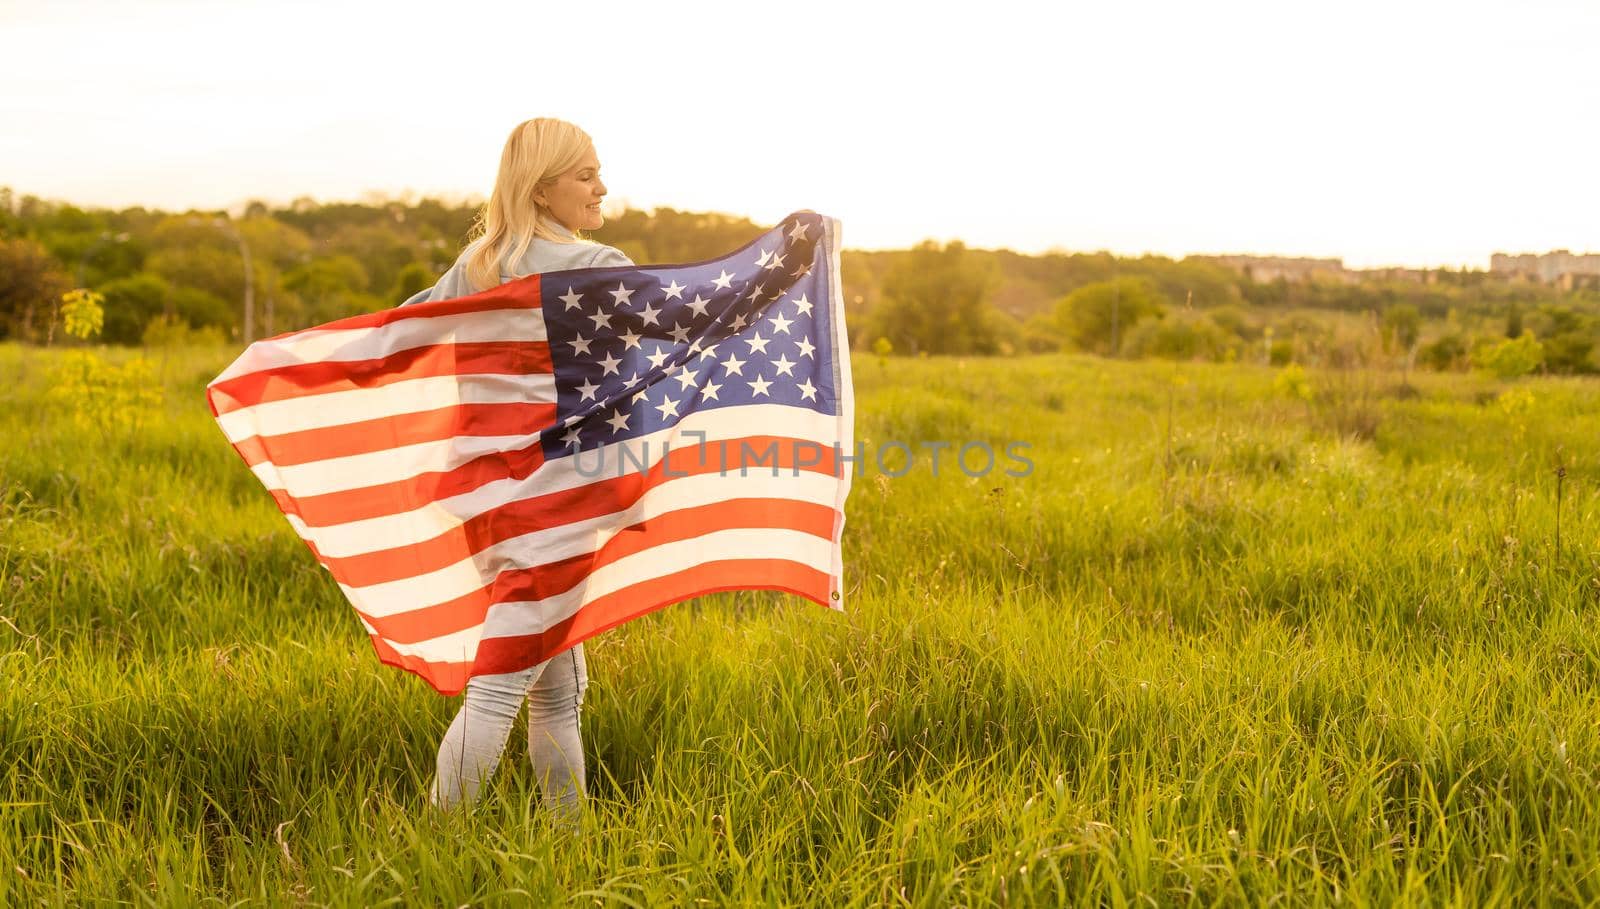 attractive woman holding an American flag in the wind in a field. Summer landscape against the blue sky. Horizontal orientation. by Andelov13